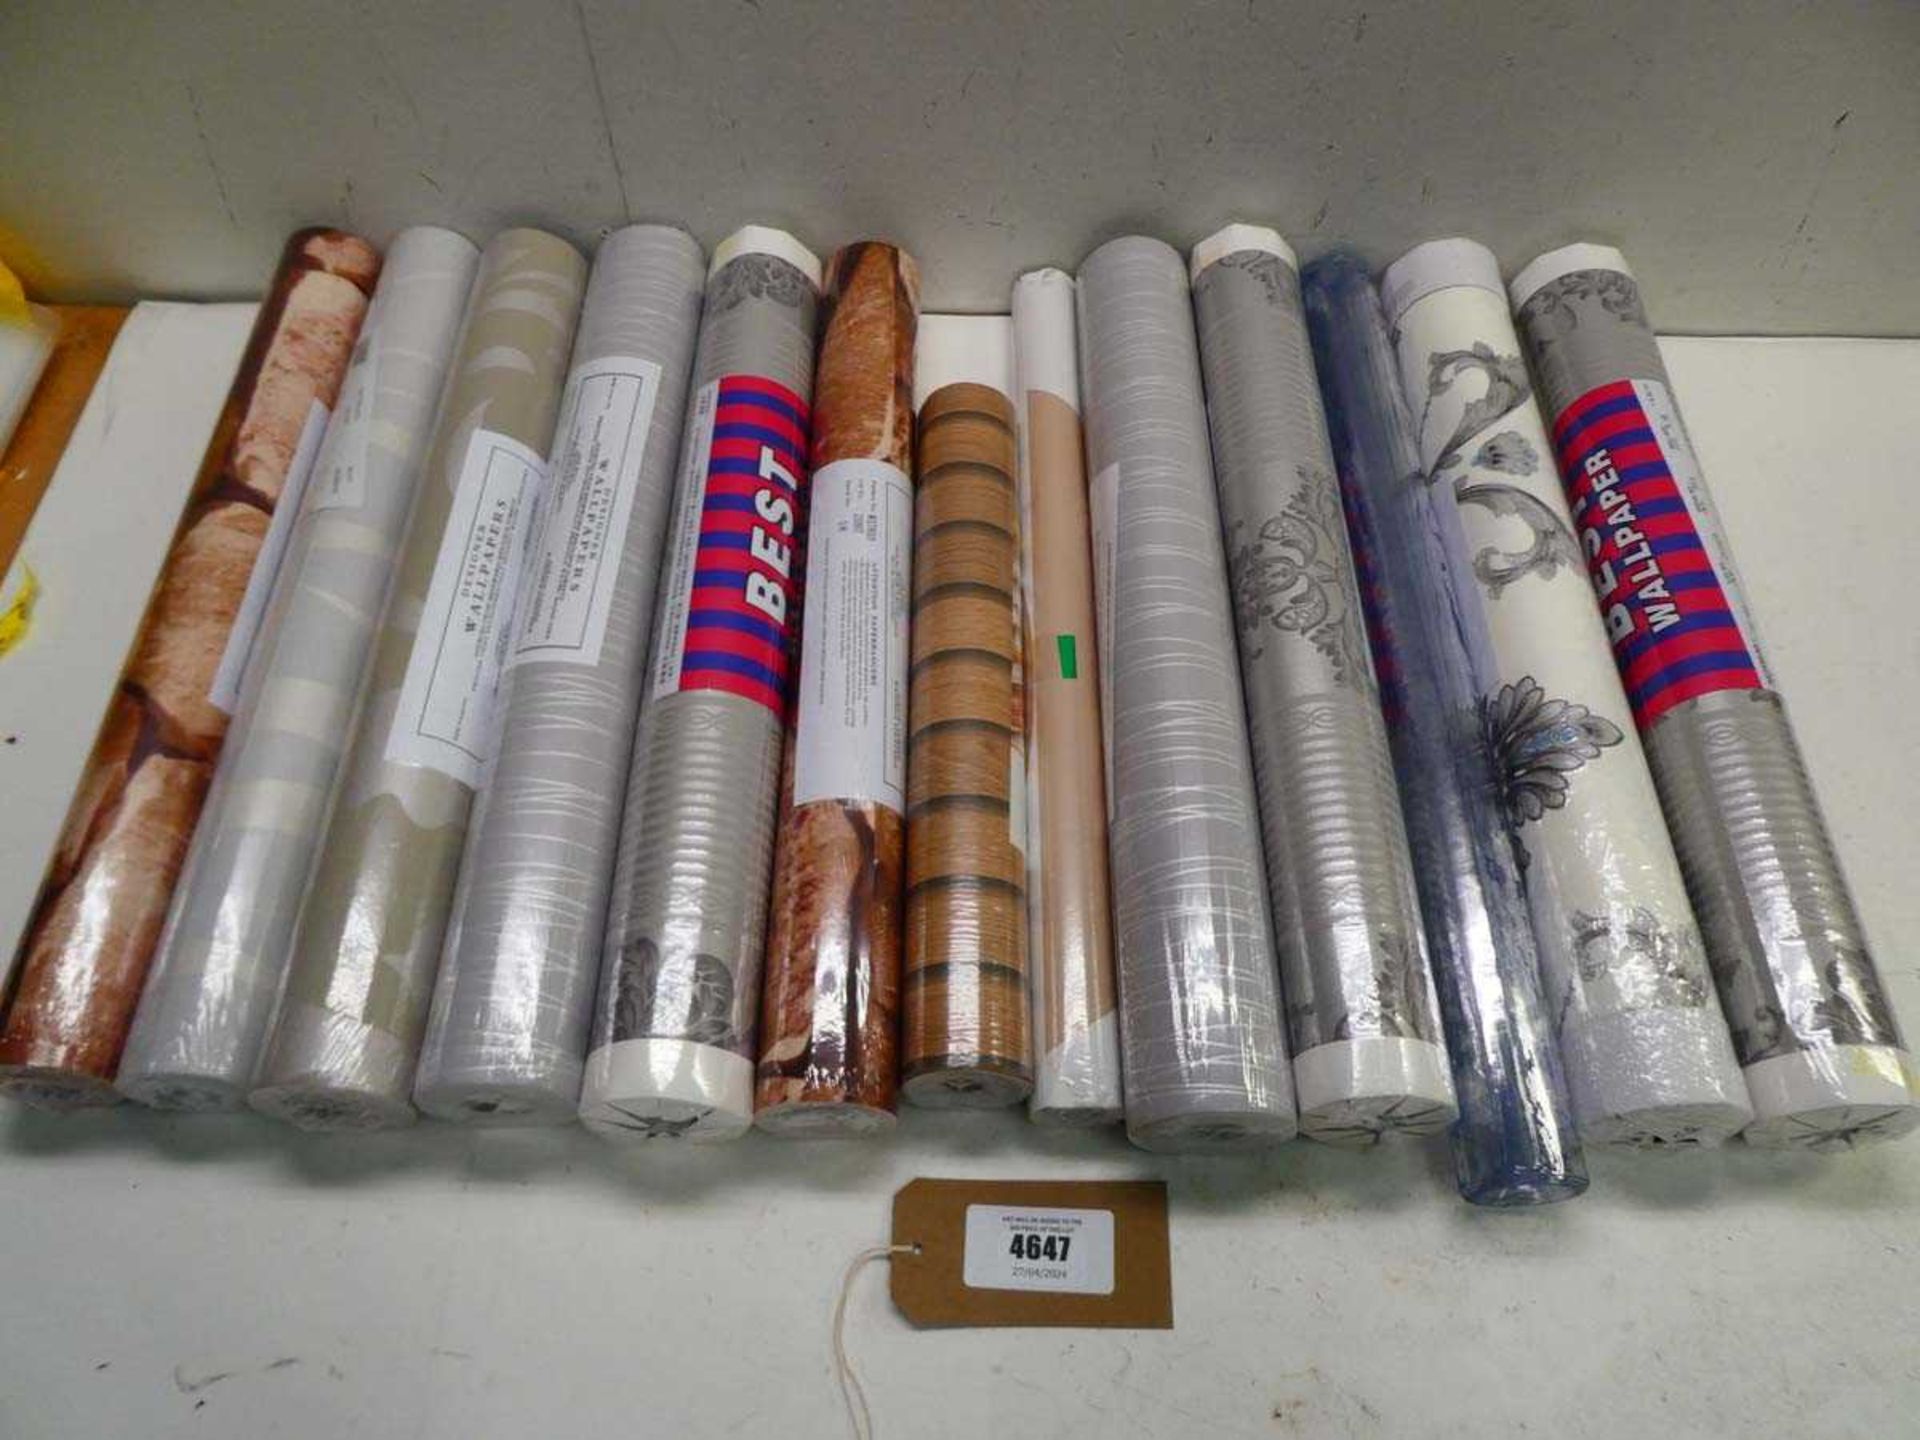 +VAT Quantity of wallpaper rolls in various designs plus a roll of clear vinyl